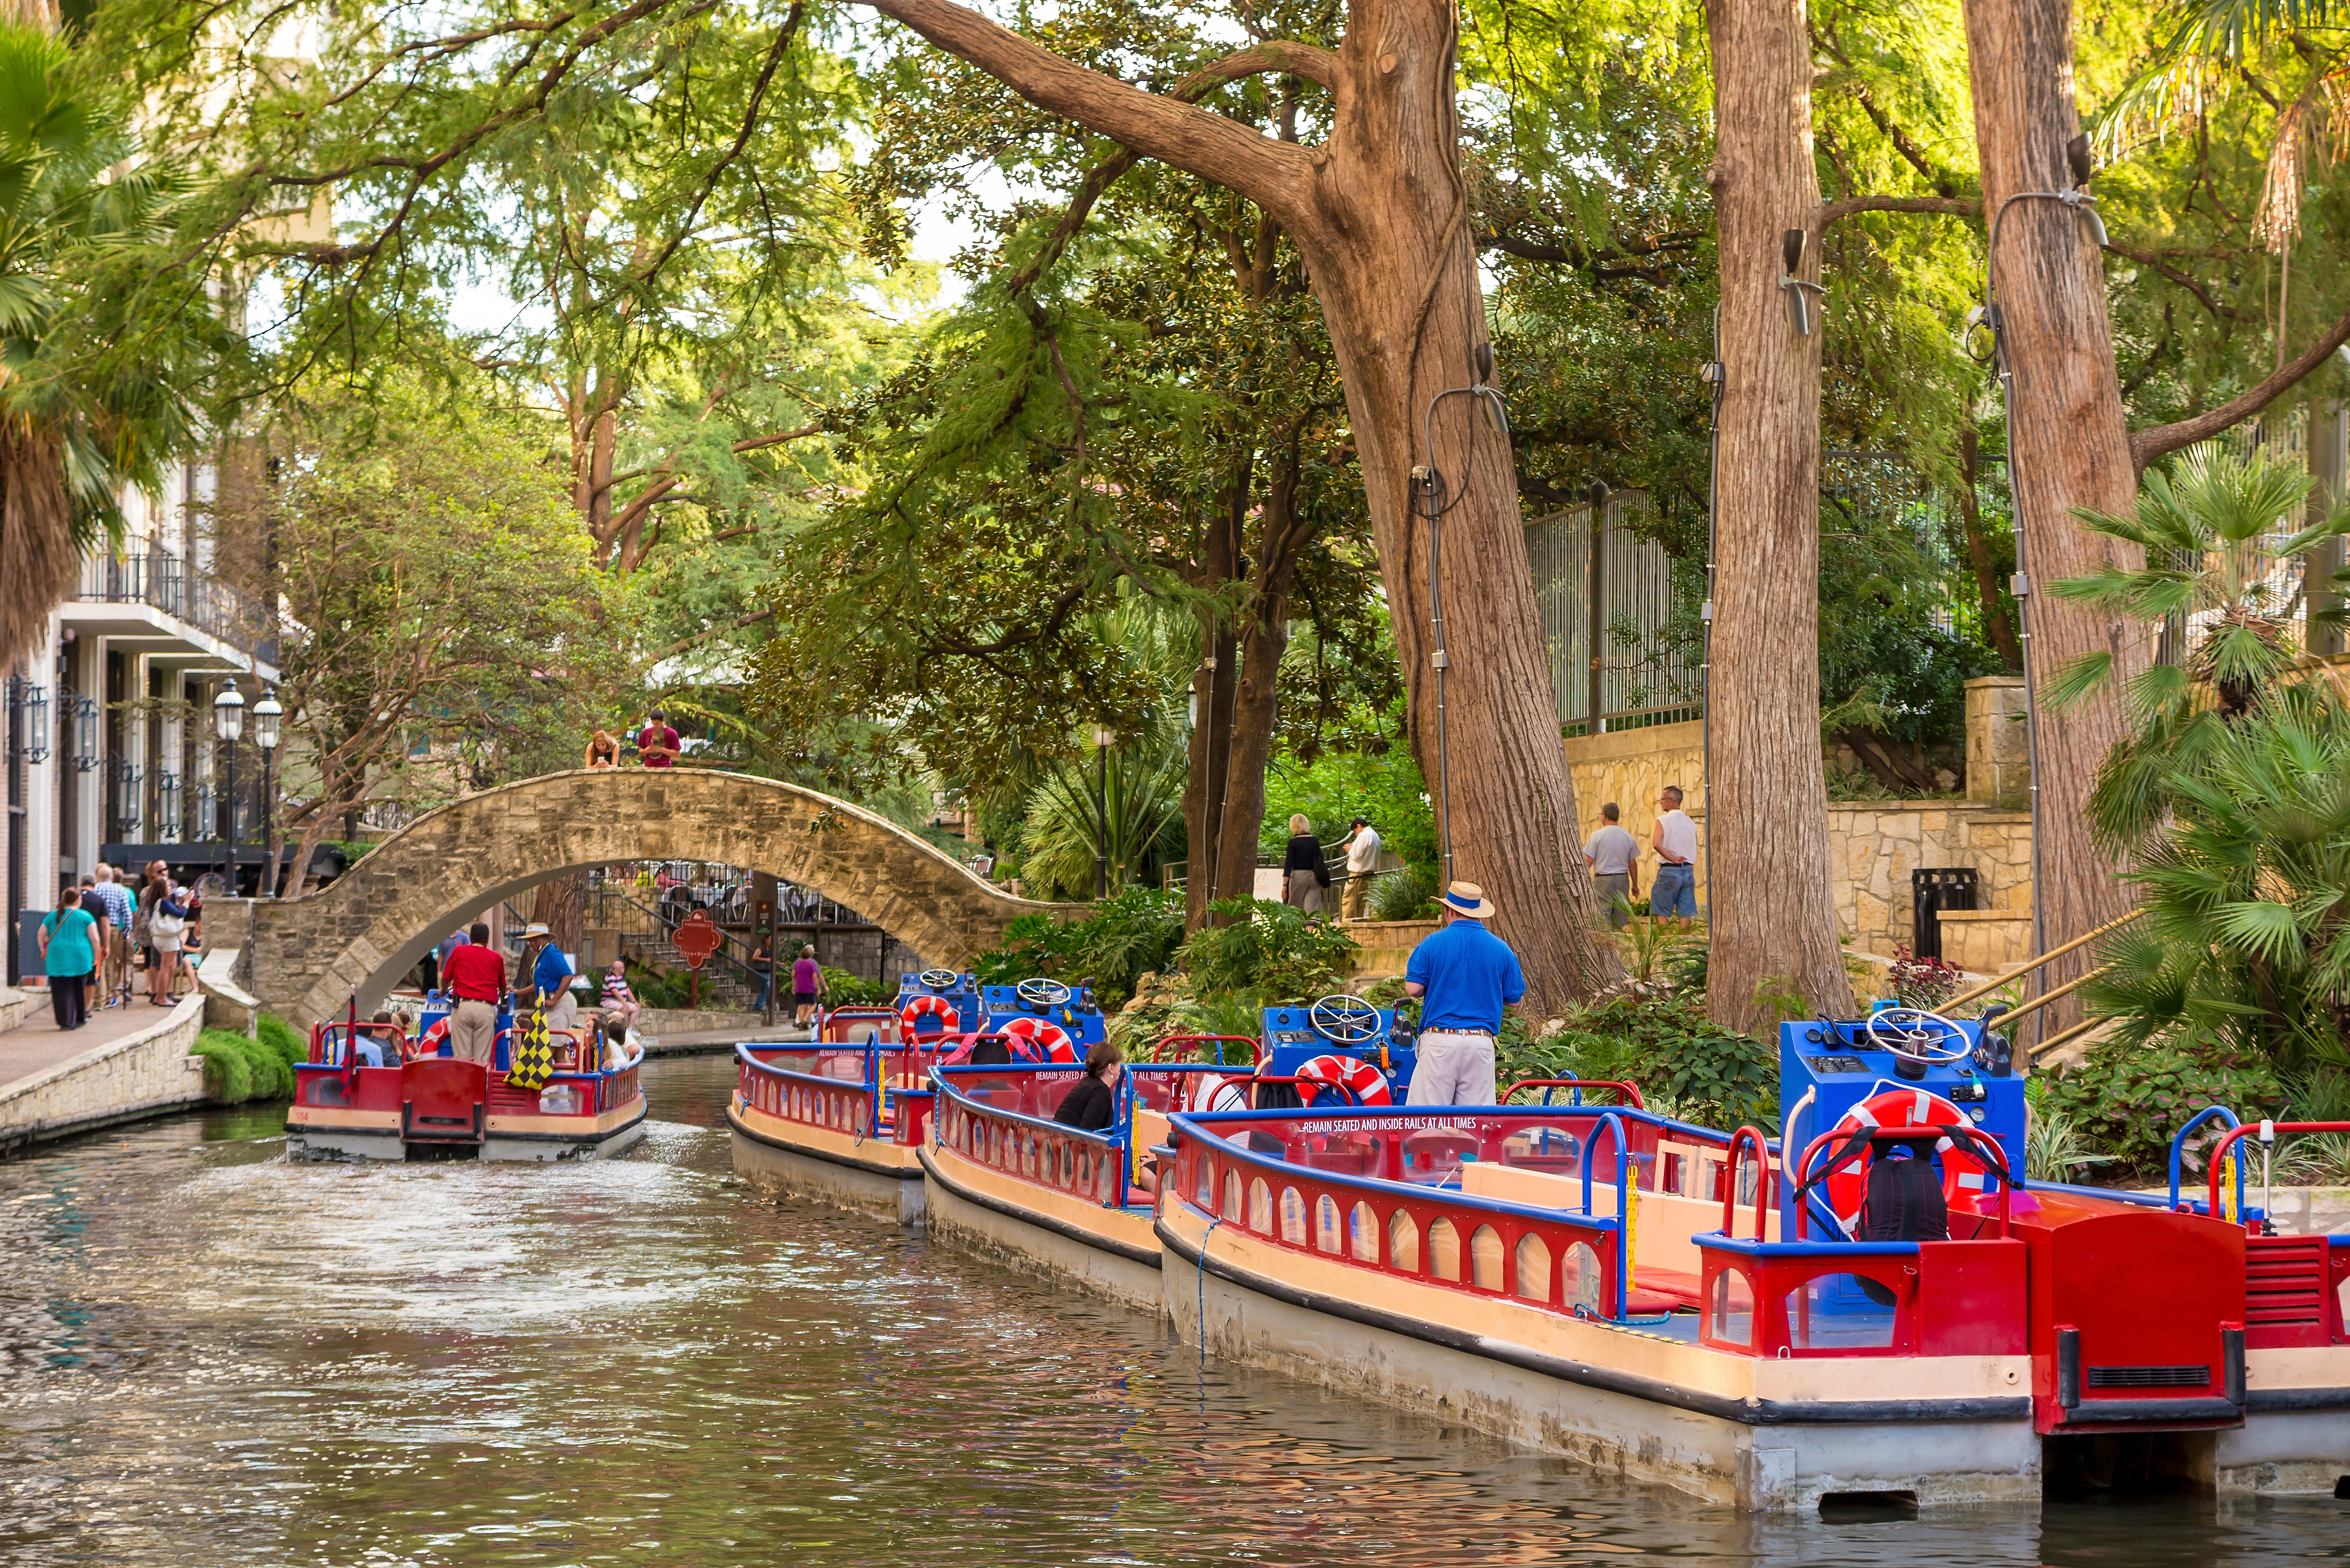 Check Out These Fabulous Attractions for National Texas Day - River Walk in San Antonio